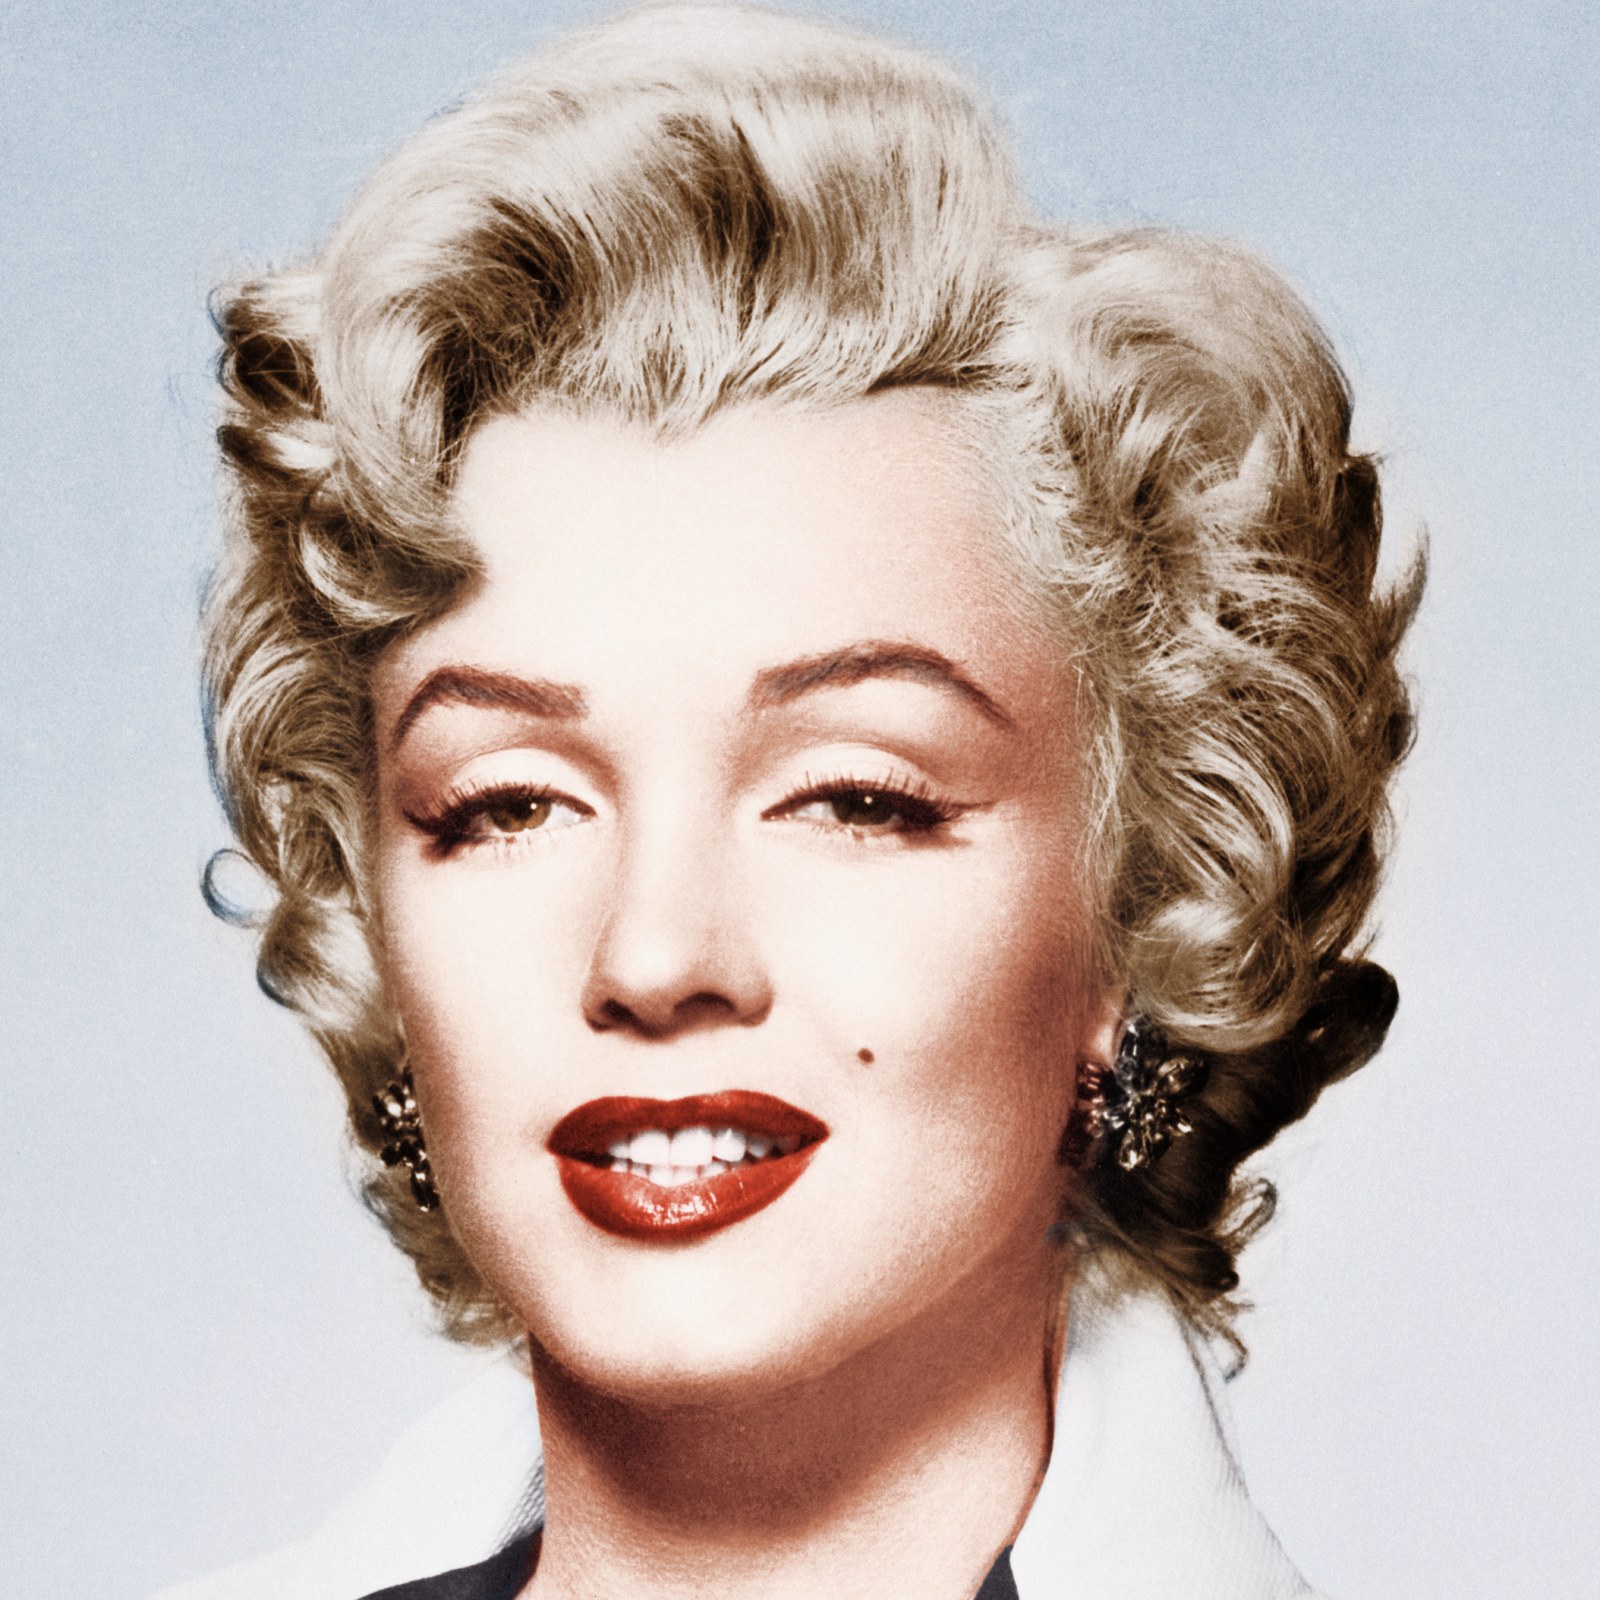 This Is How Marilyn Monroe Would Look If She Swapped Her 'Grandma Hair' for  a Modern Style